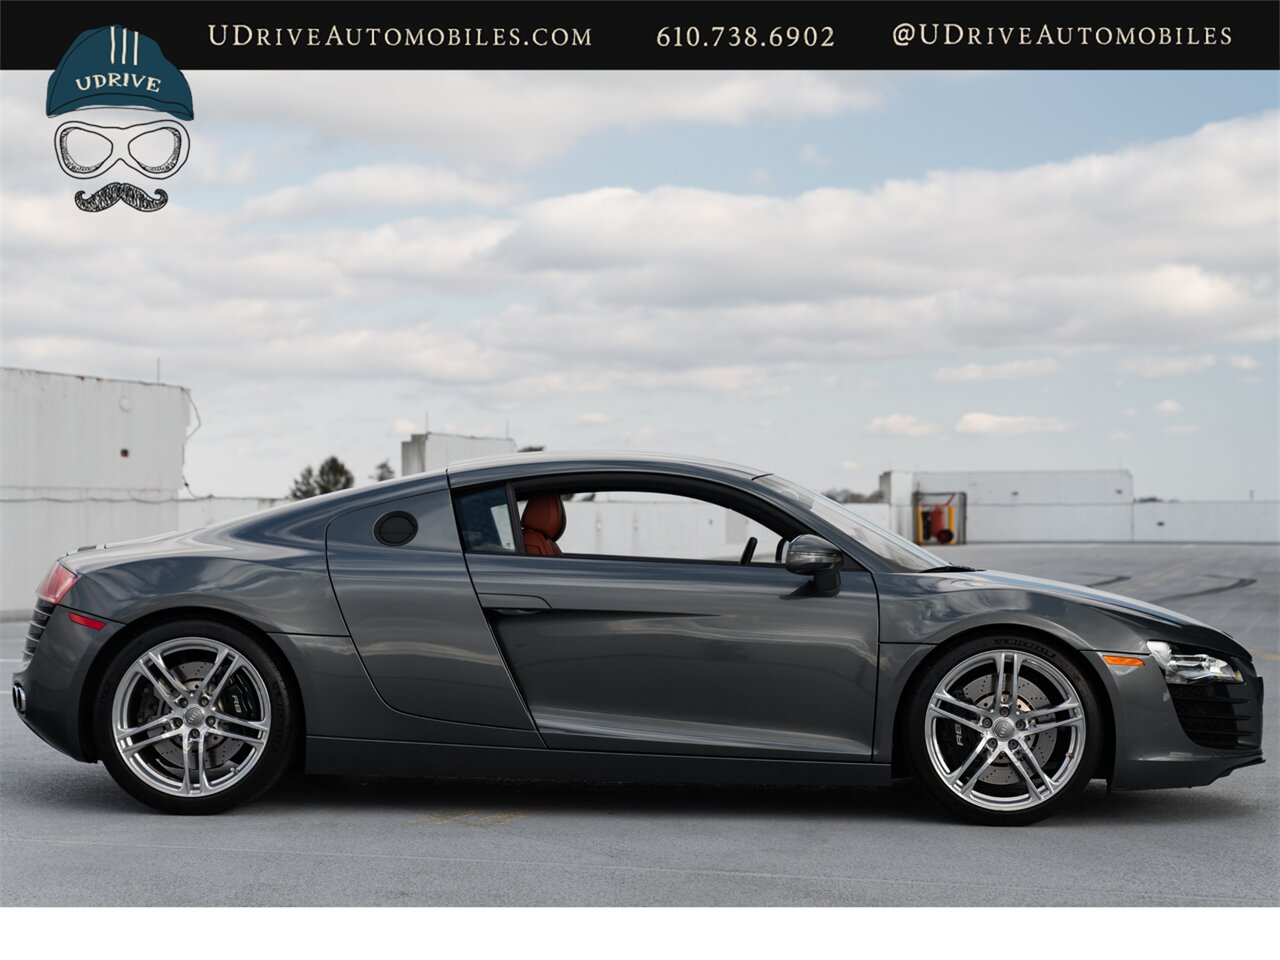 2009 Audi R8 Quattro  4.2 V8 6 Speed Manual 15k Miles - Photo 19 - West Chester, PA 19382